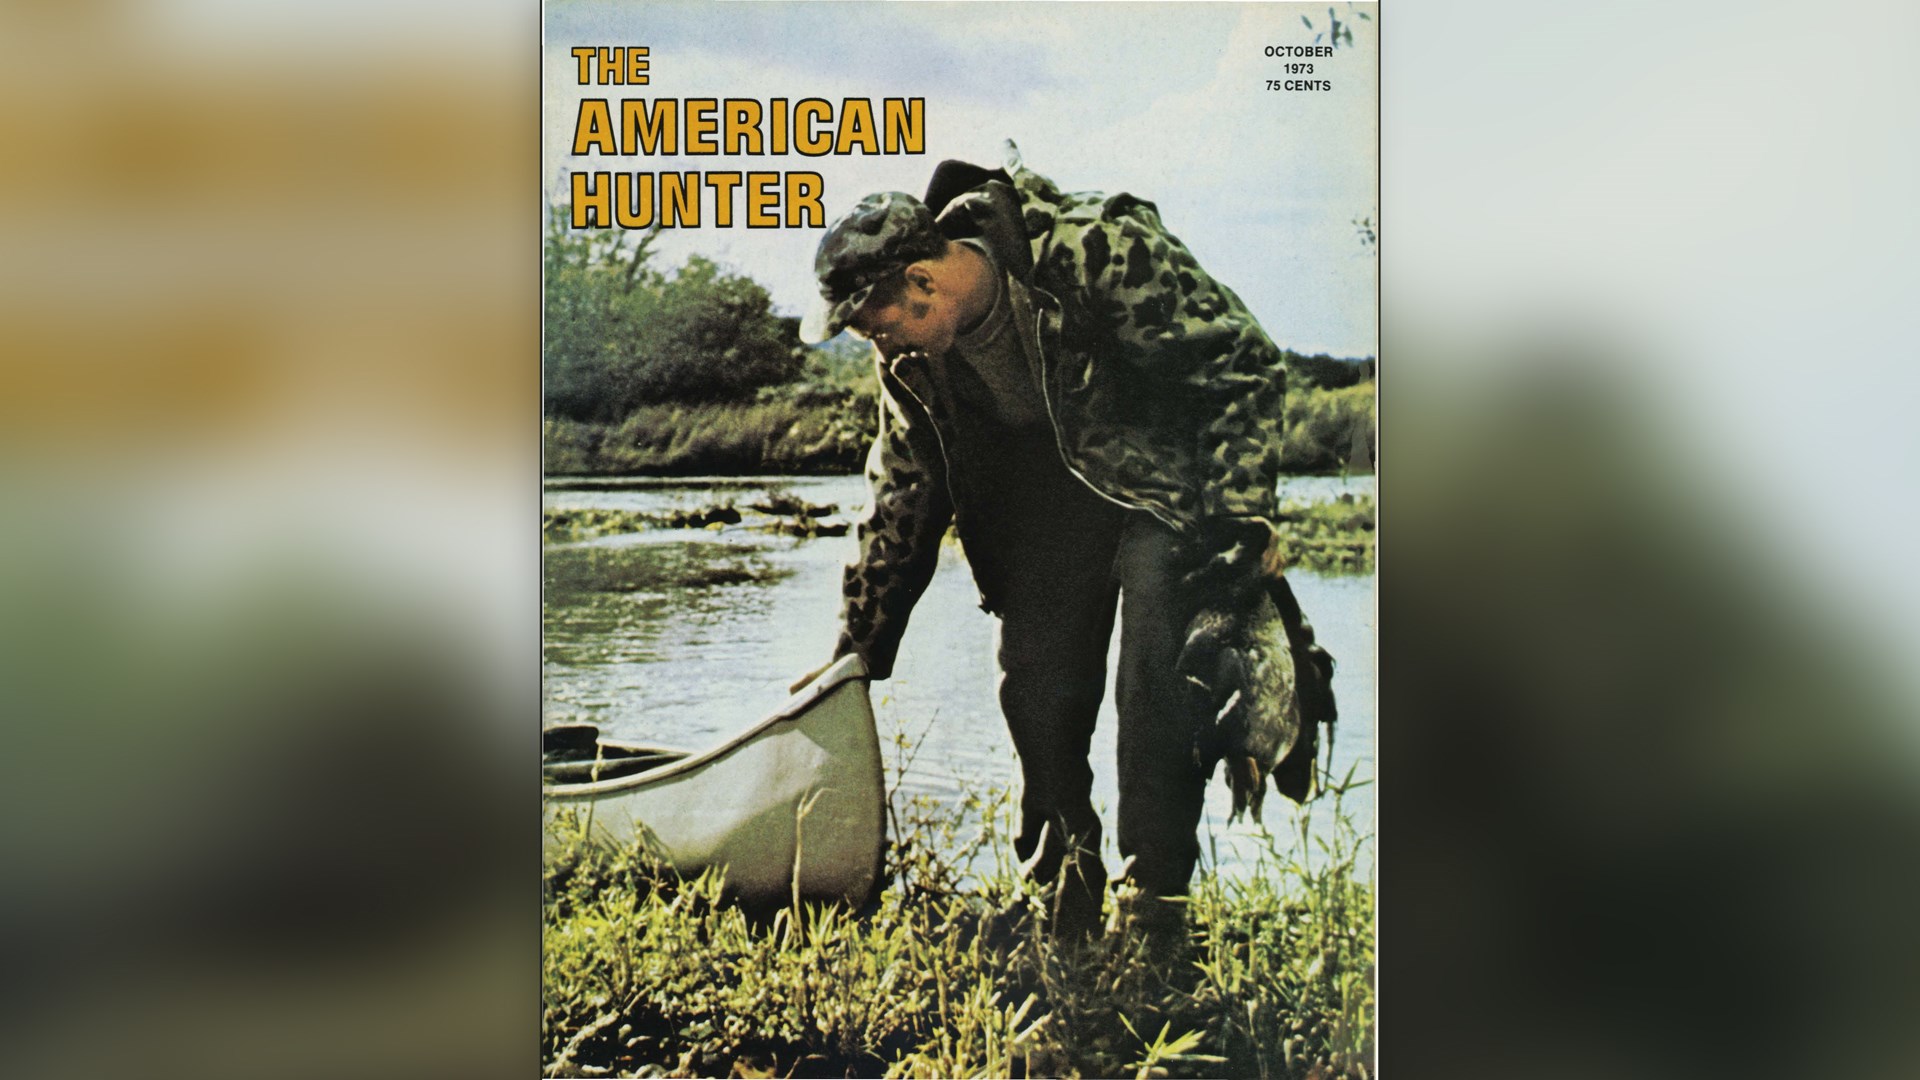 The American Hunter magazine cover man hunter camouflage ducks water boat canoe grasses outdoors river pond lake